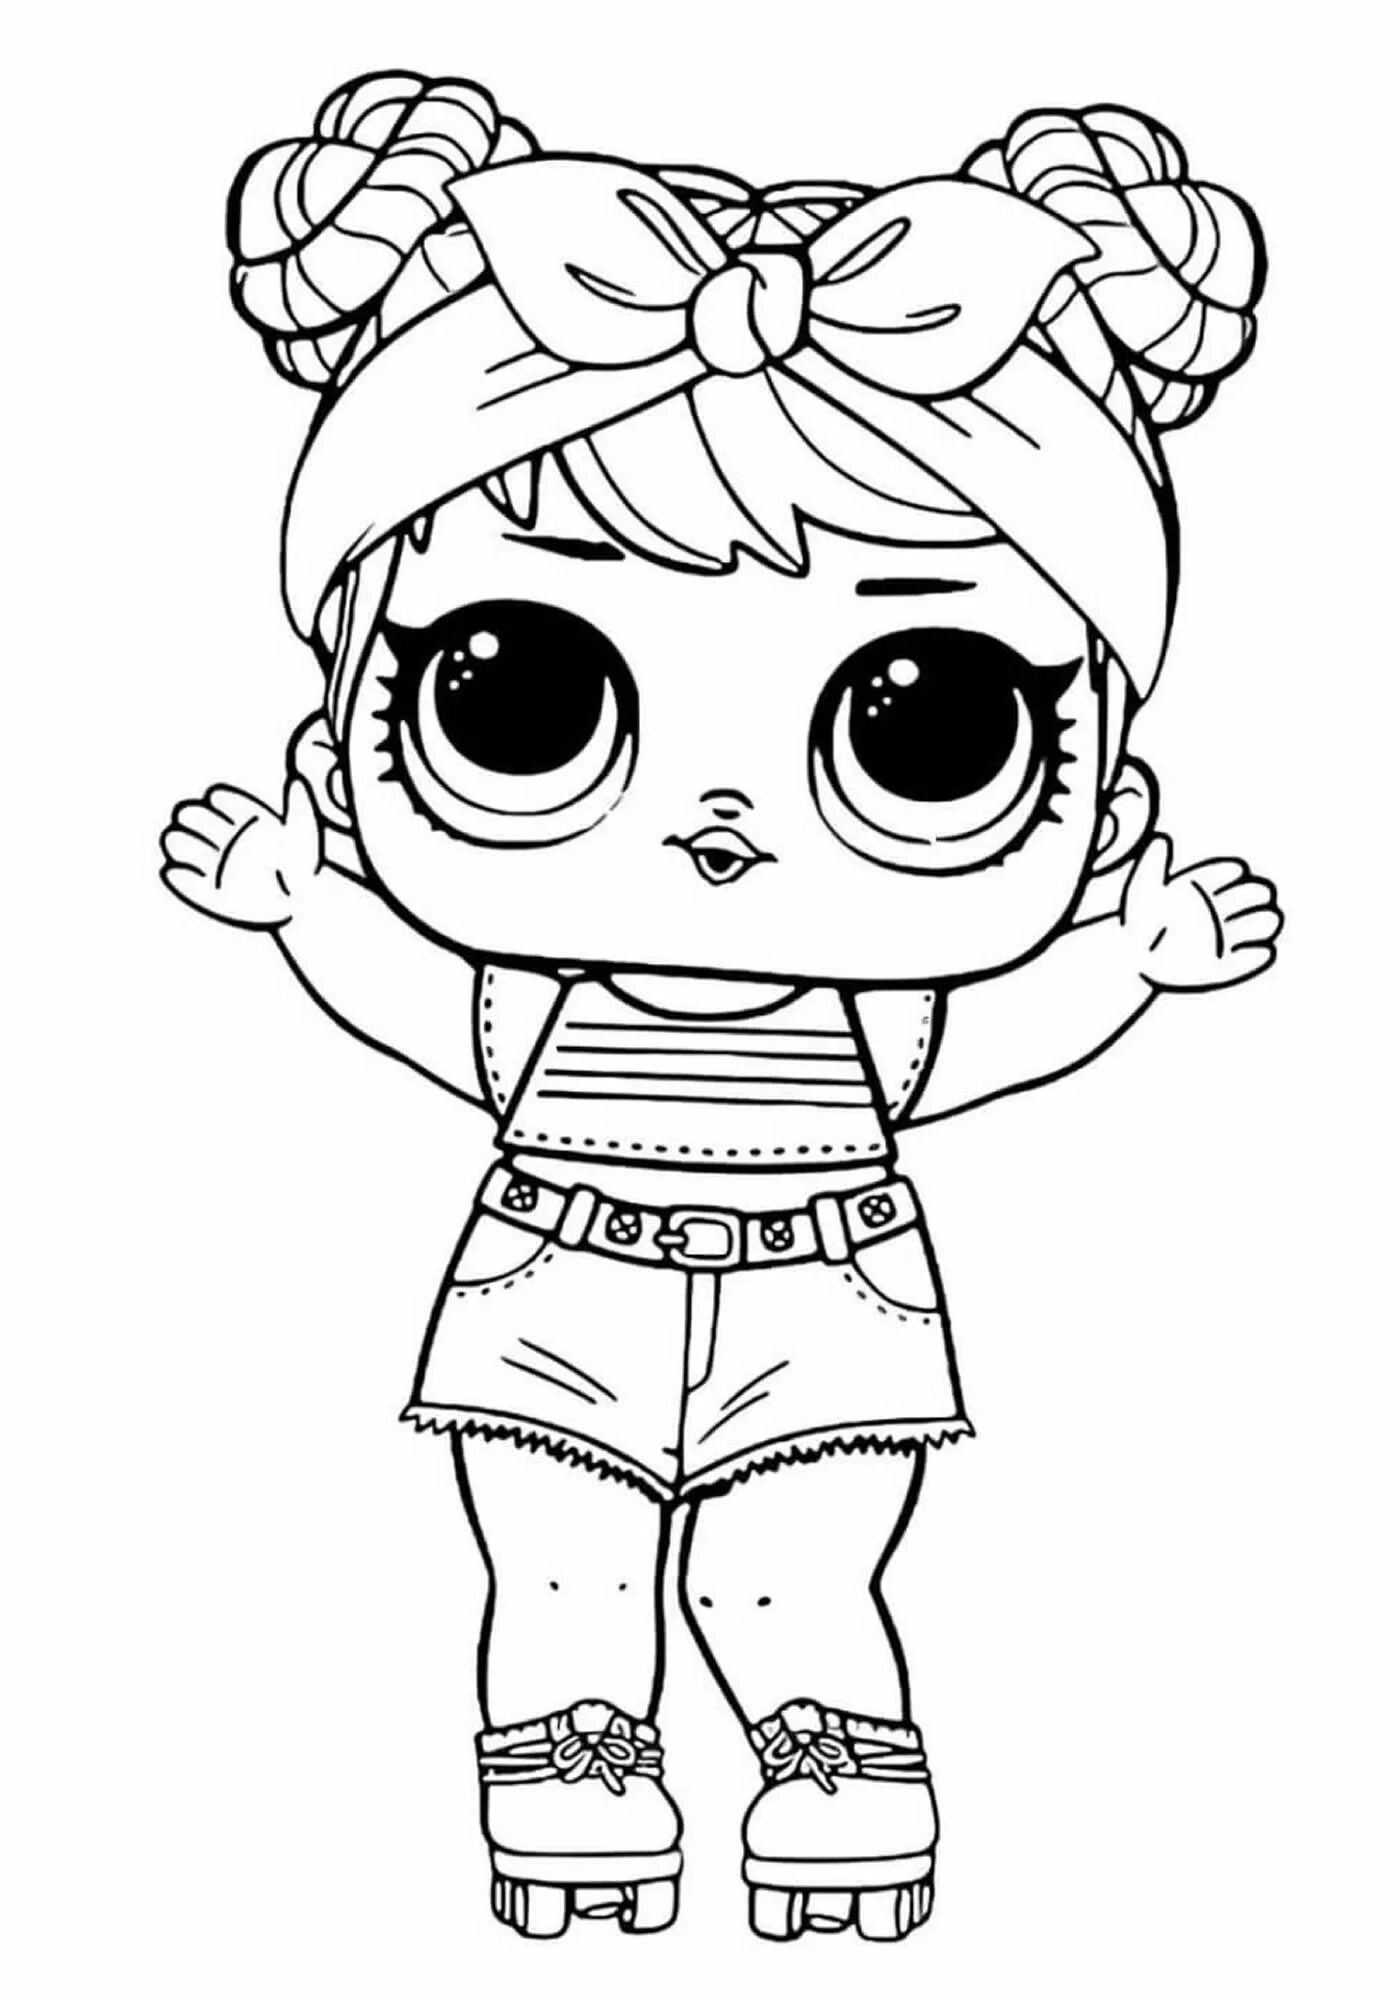 Playful dolls turn on dolls lol coloring page